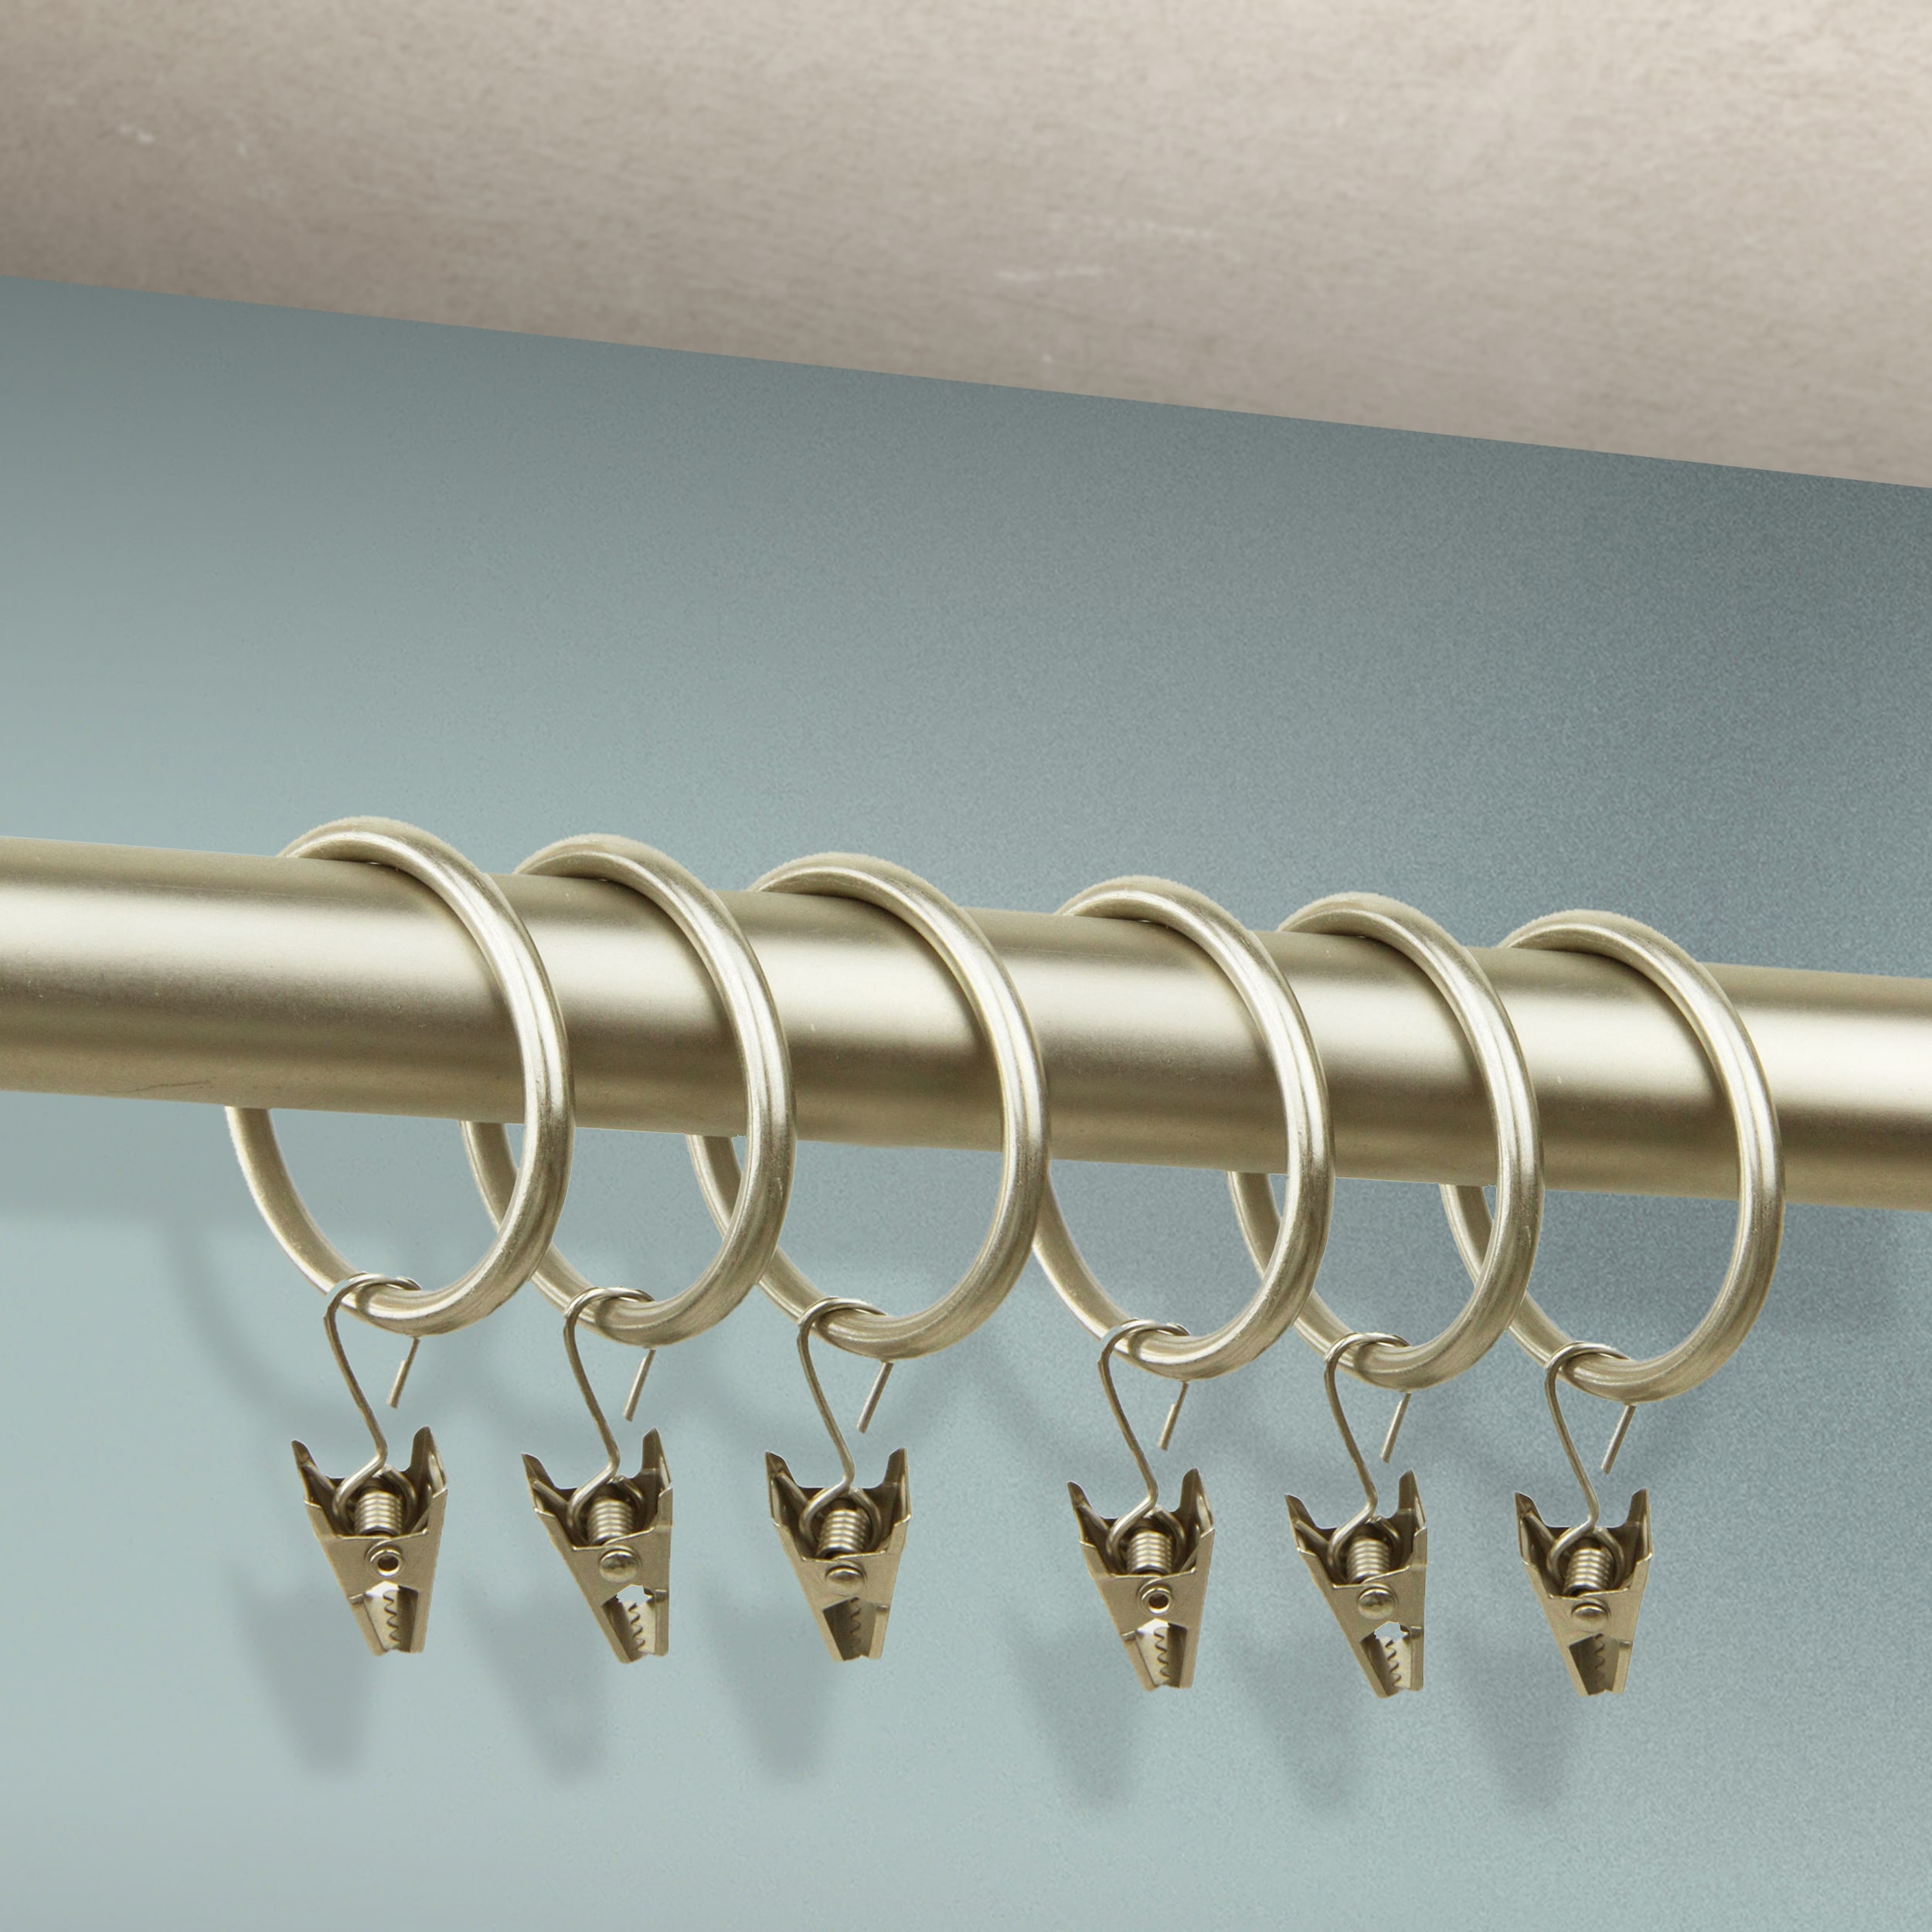 Double Track Curtain Rod with Ceiling Mount Universal-20, fully made of Stainless  Steel, Tube Diameter 20mm.